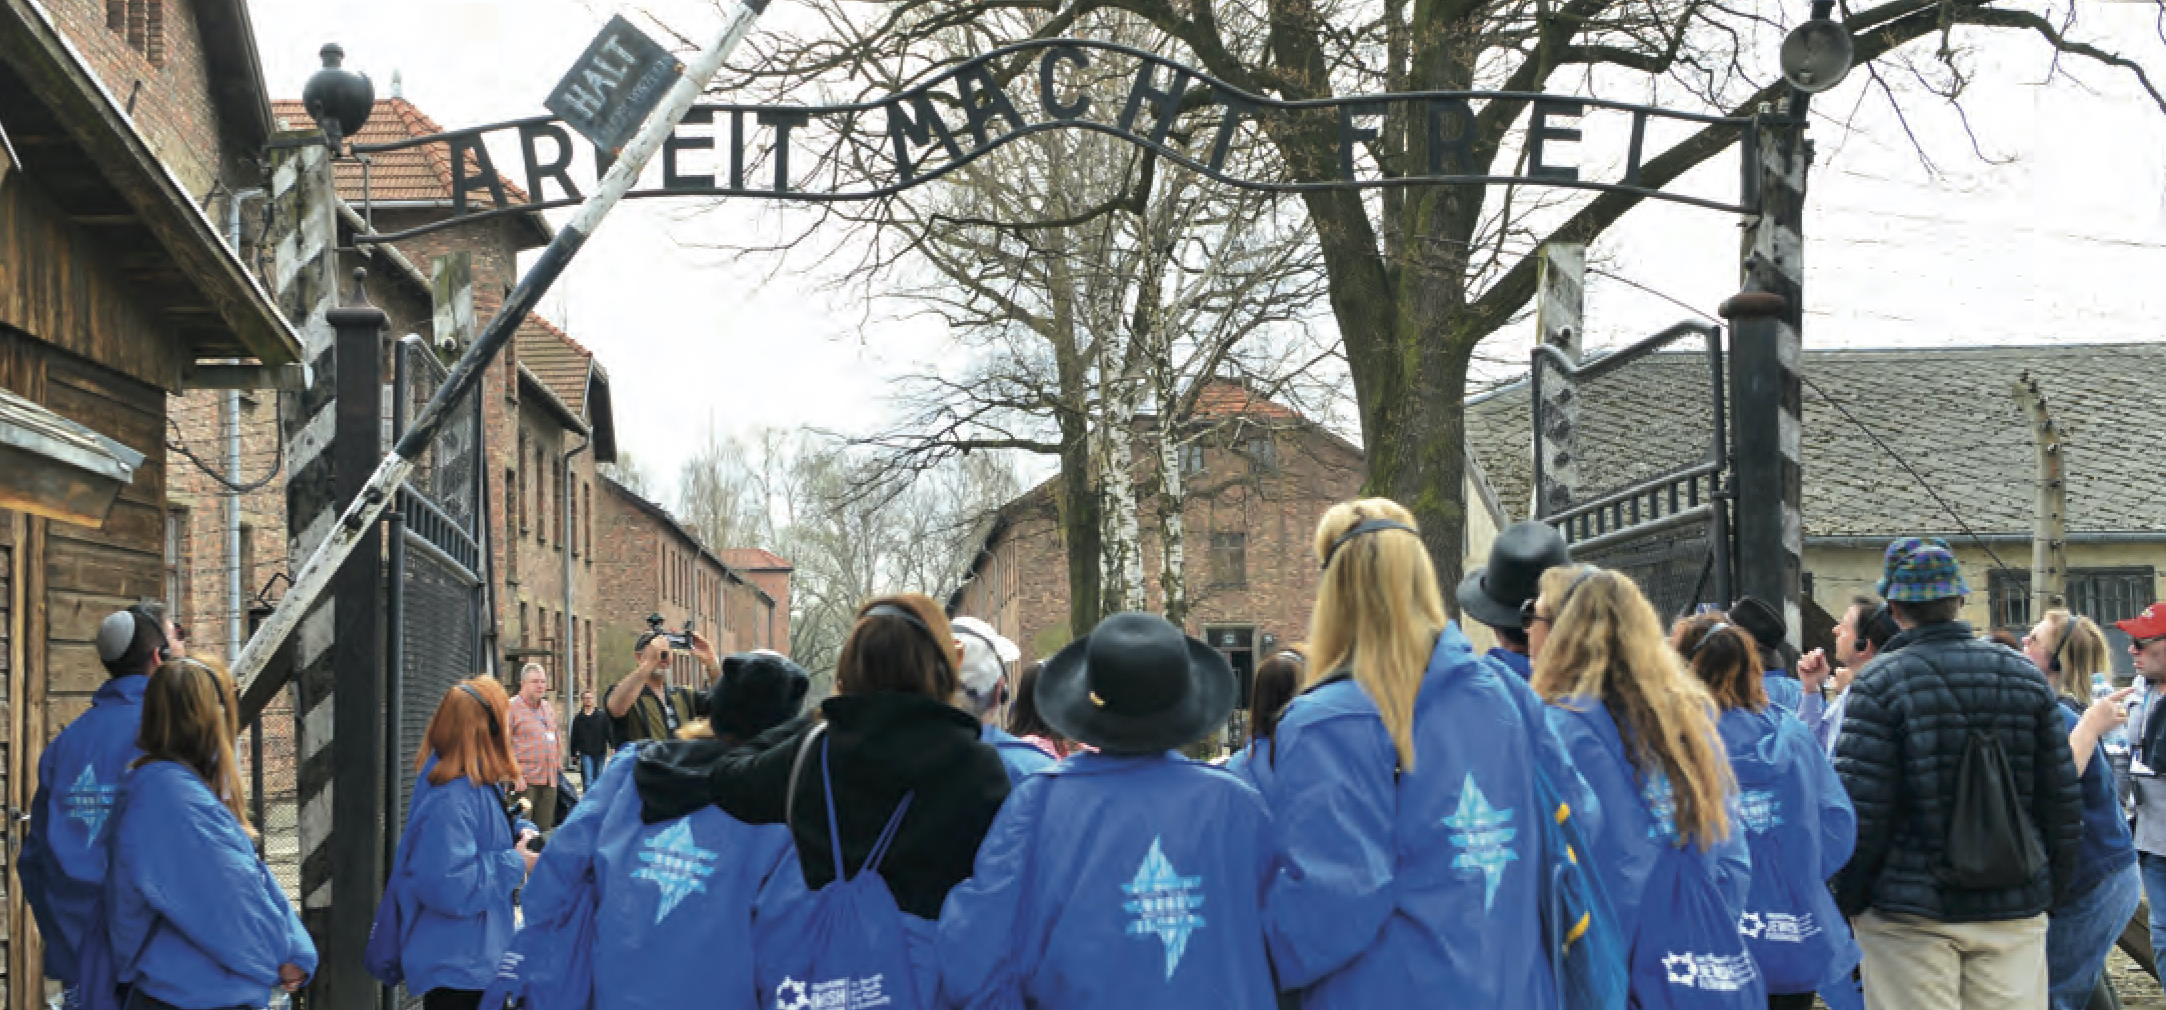 2021 International March of the Living: Commemoration and Ceremony to Observe “Yom HaShoah”